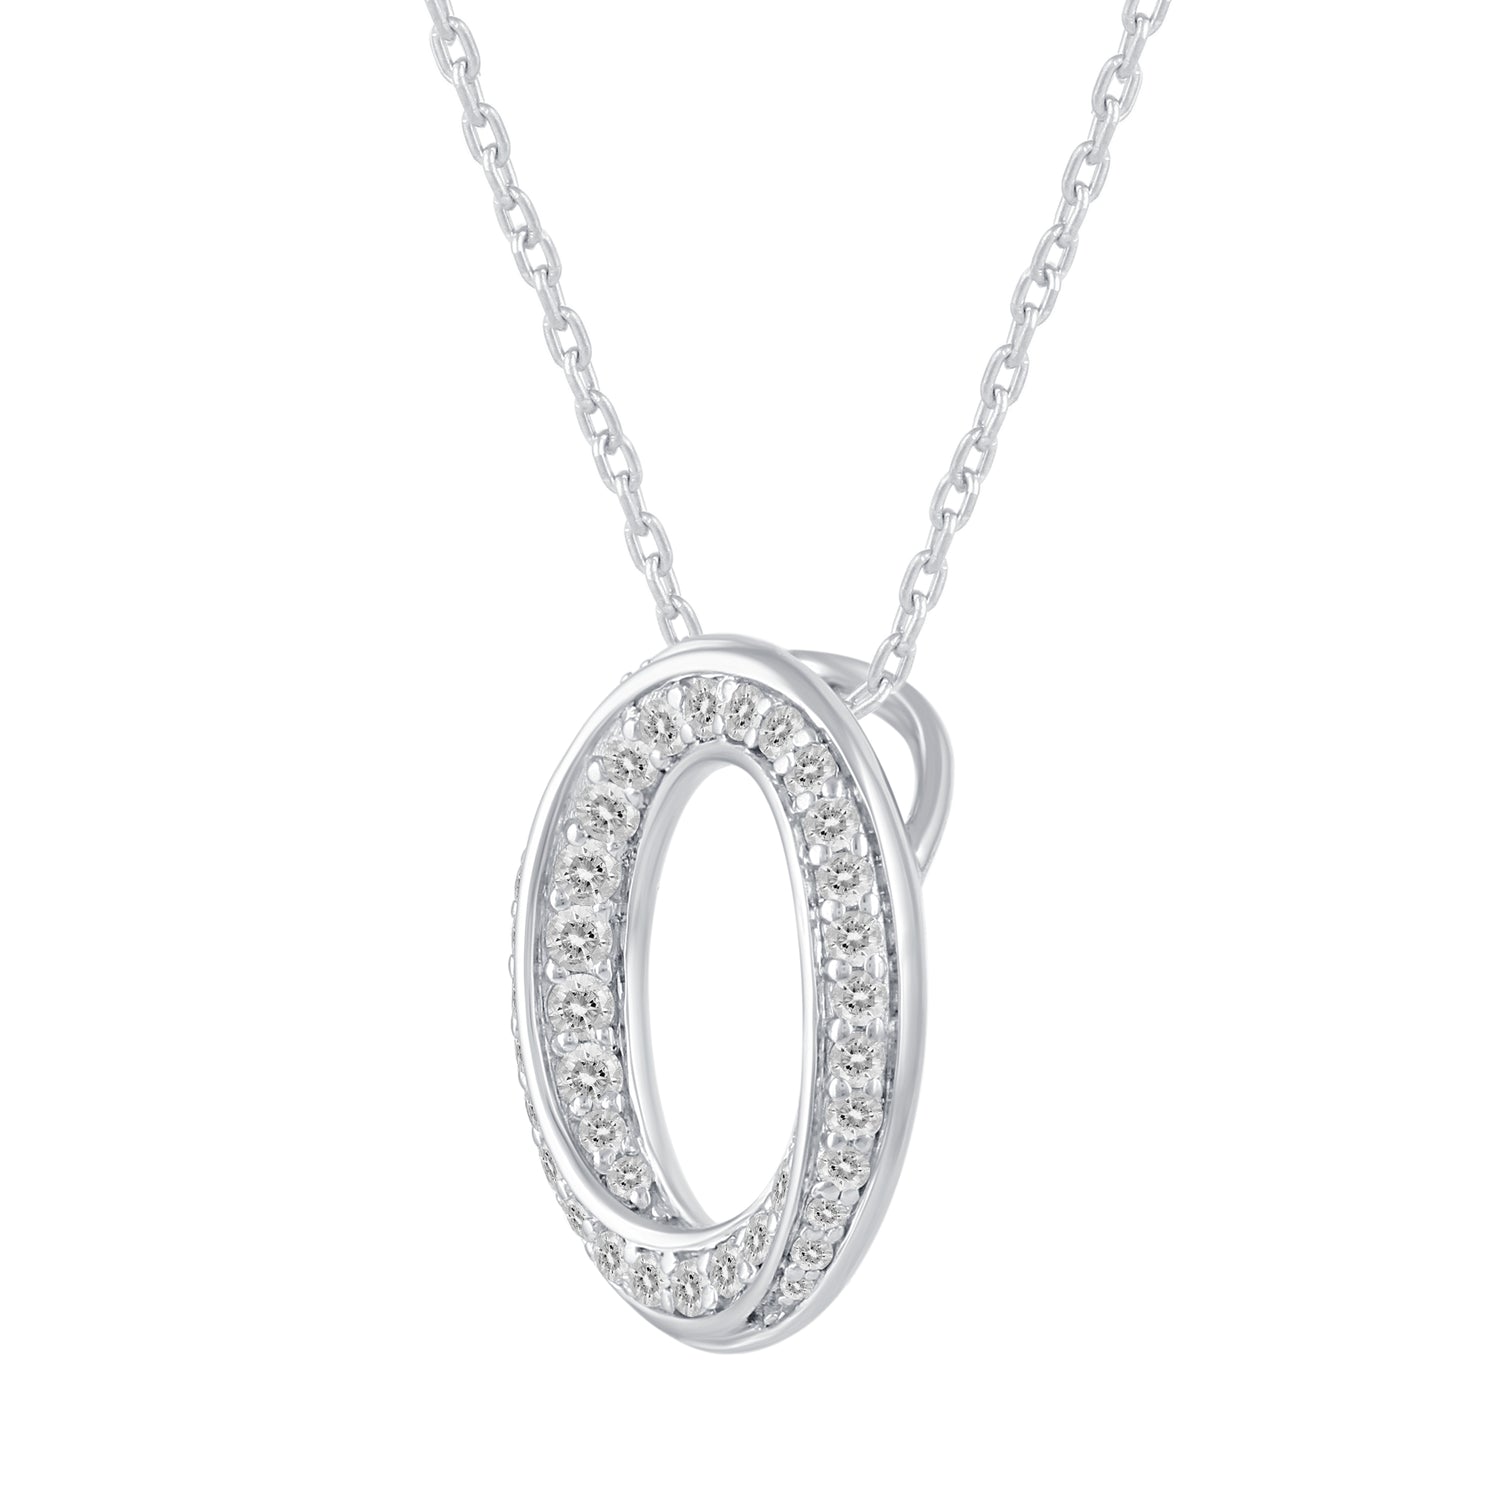 1/2 Cttw Diamond Open Pave Twisted Pendant Necklace set in 925 Sterling Silver (Select Design) oval round square marquise